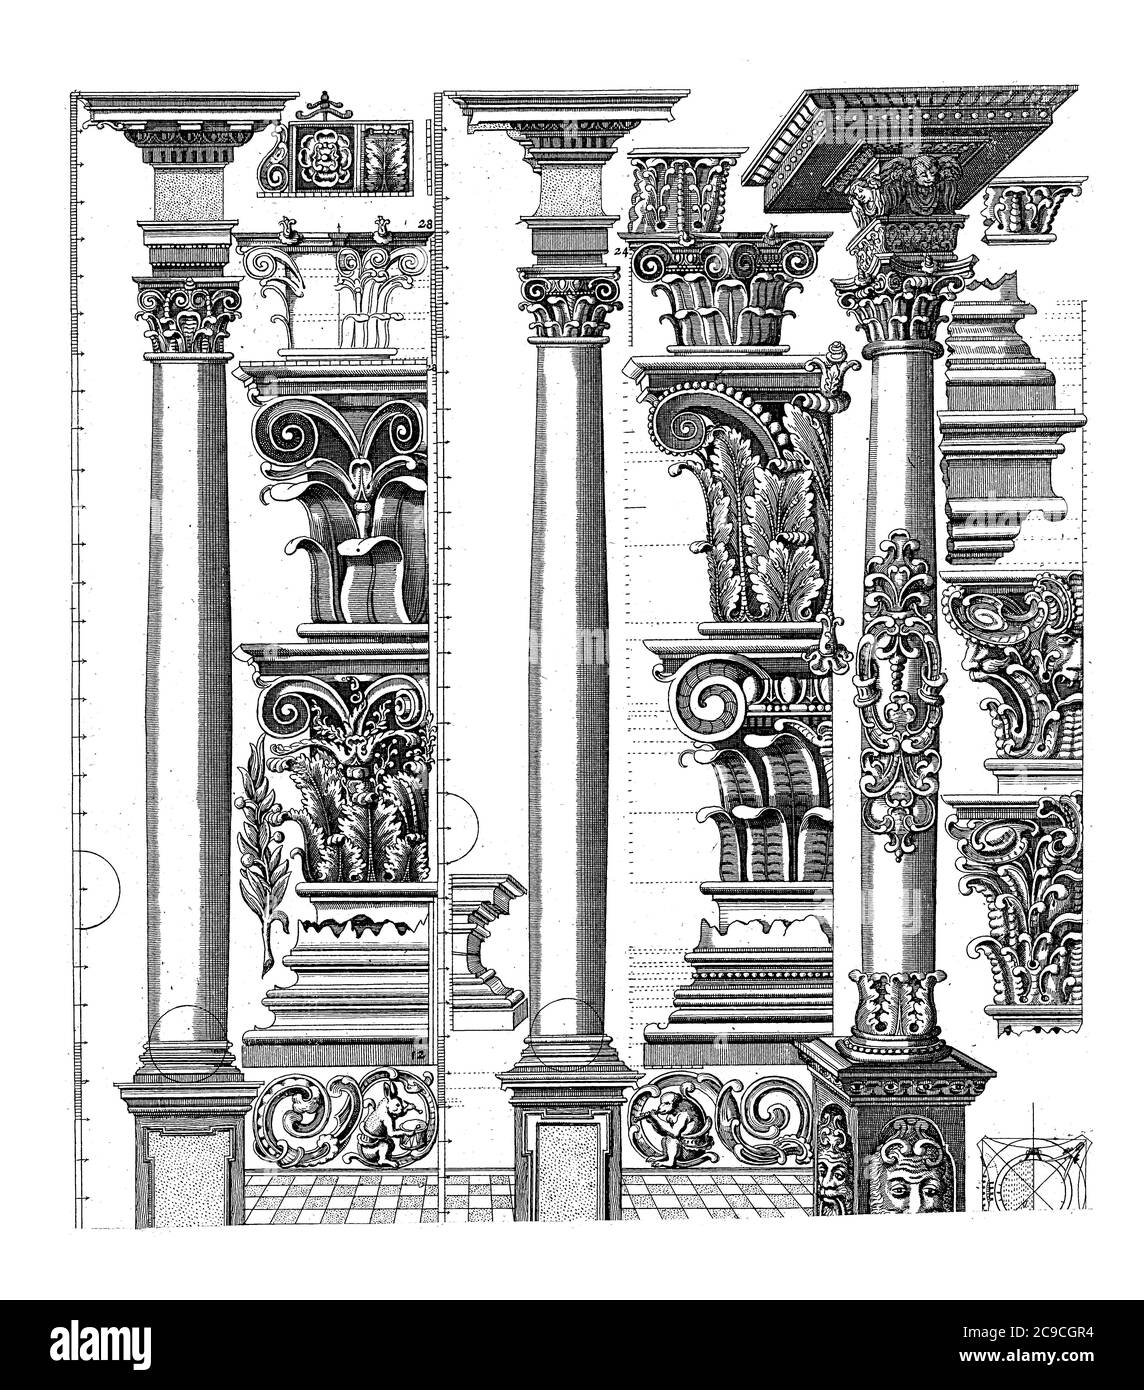 Columns of the Corinthian and Composite Order. There are three pillars on one foot. To the right of each column, capitals and other ornaments are stac Stock Photo